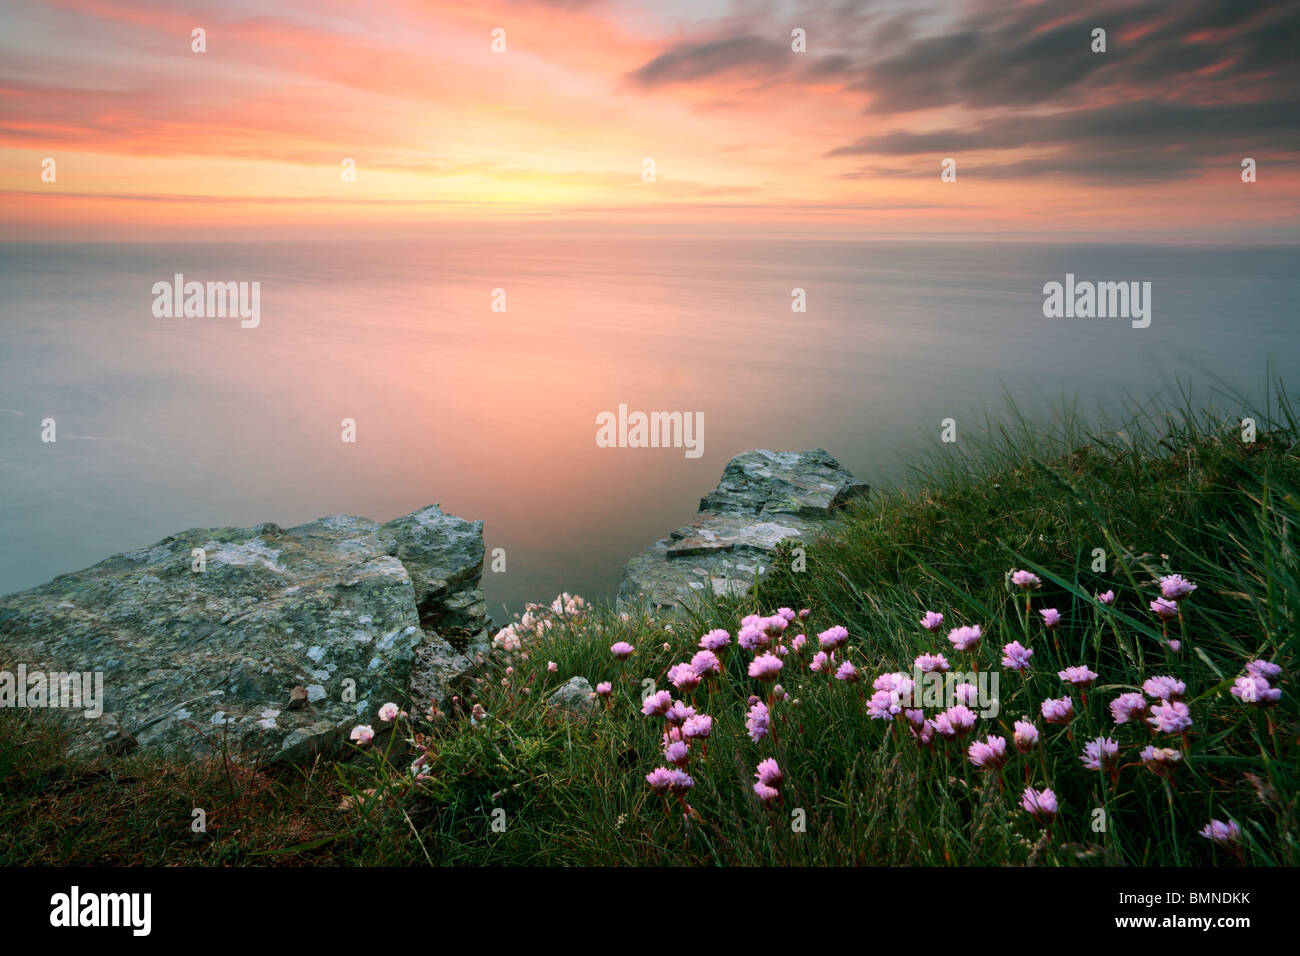 Summer thrift and a twilight sky from the edge of Valley of the Rocks near Lynton in Exmoor National Park, Devon, England Stock Photo